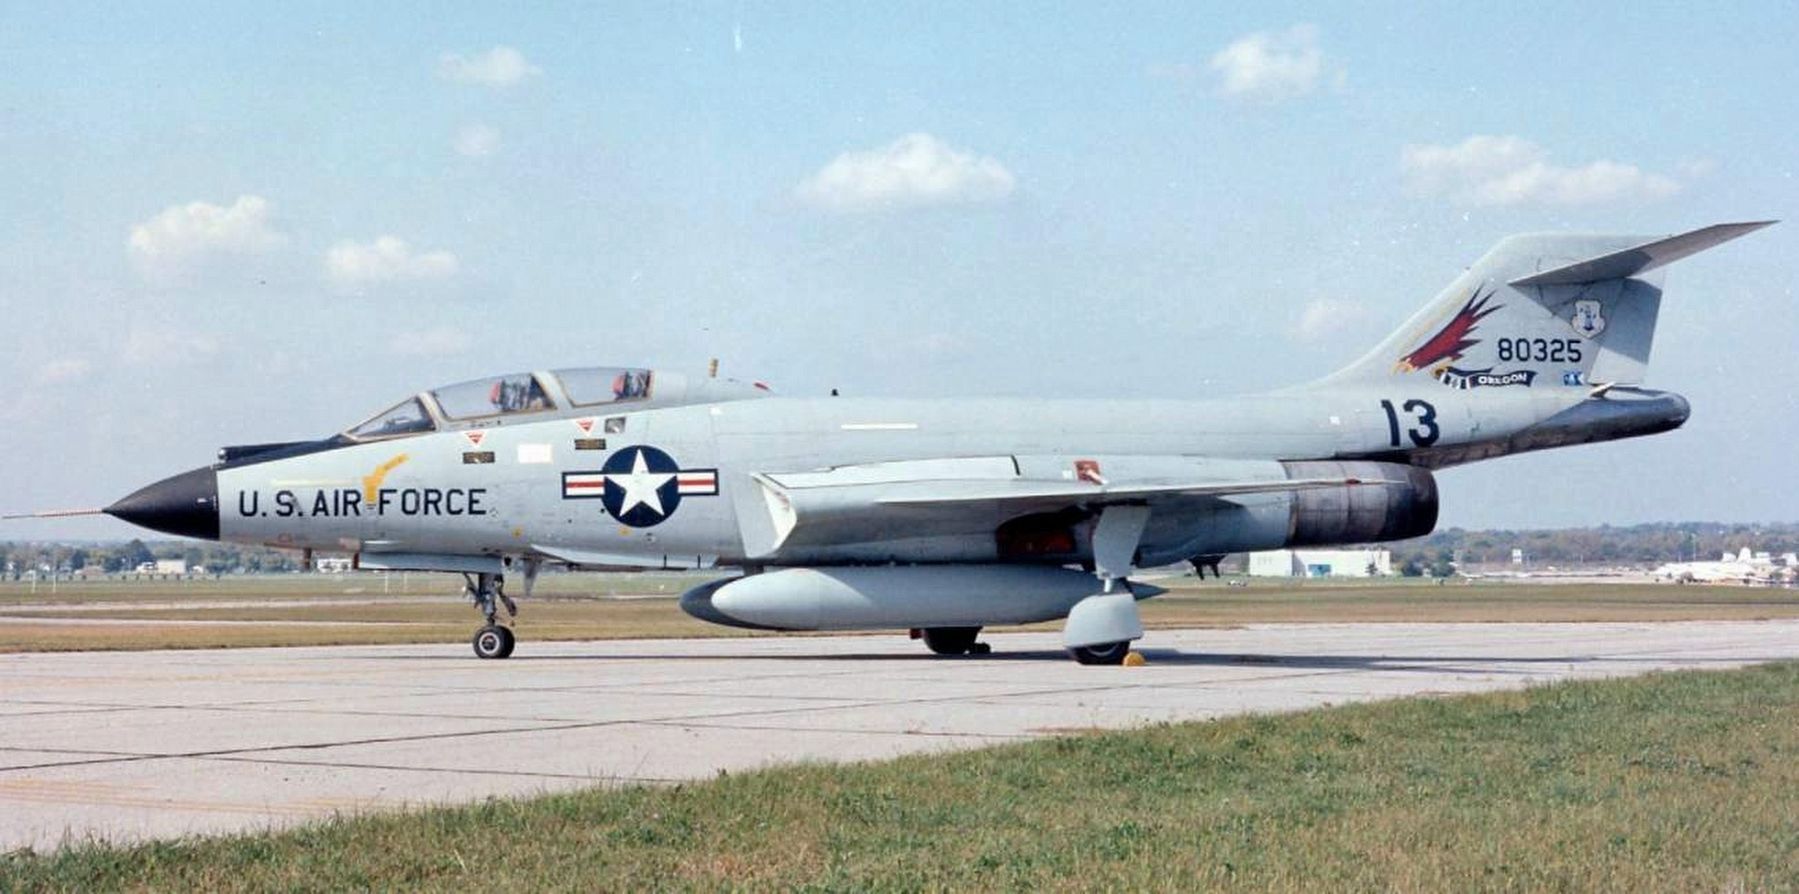 F-101 Voodoo Escort Fighter image. Click for full size.